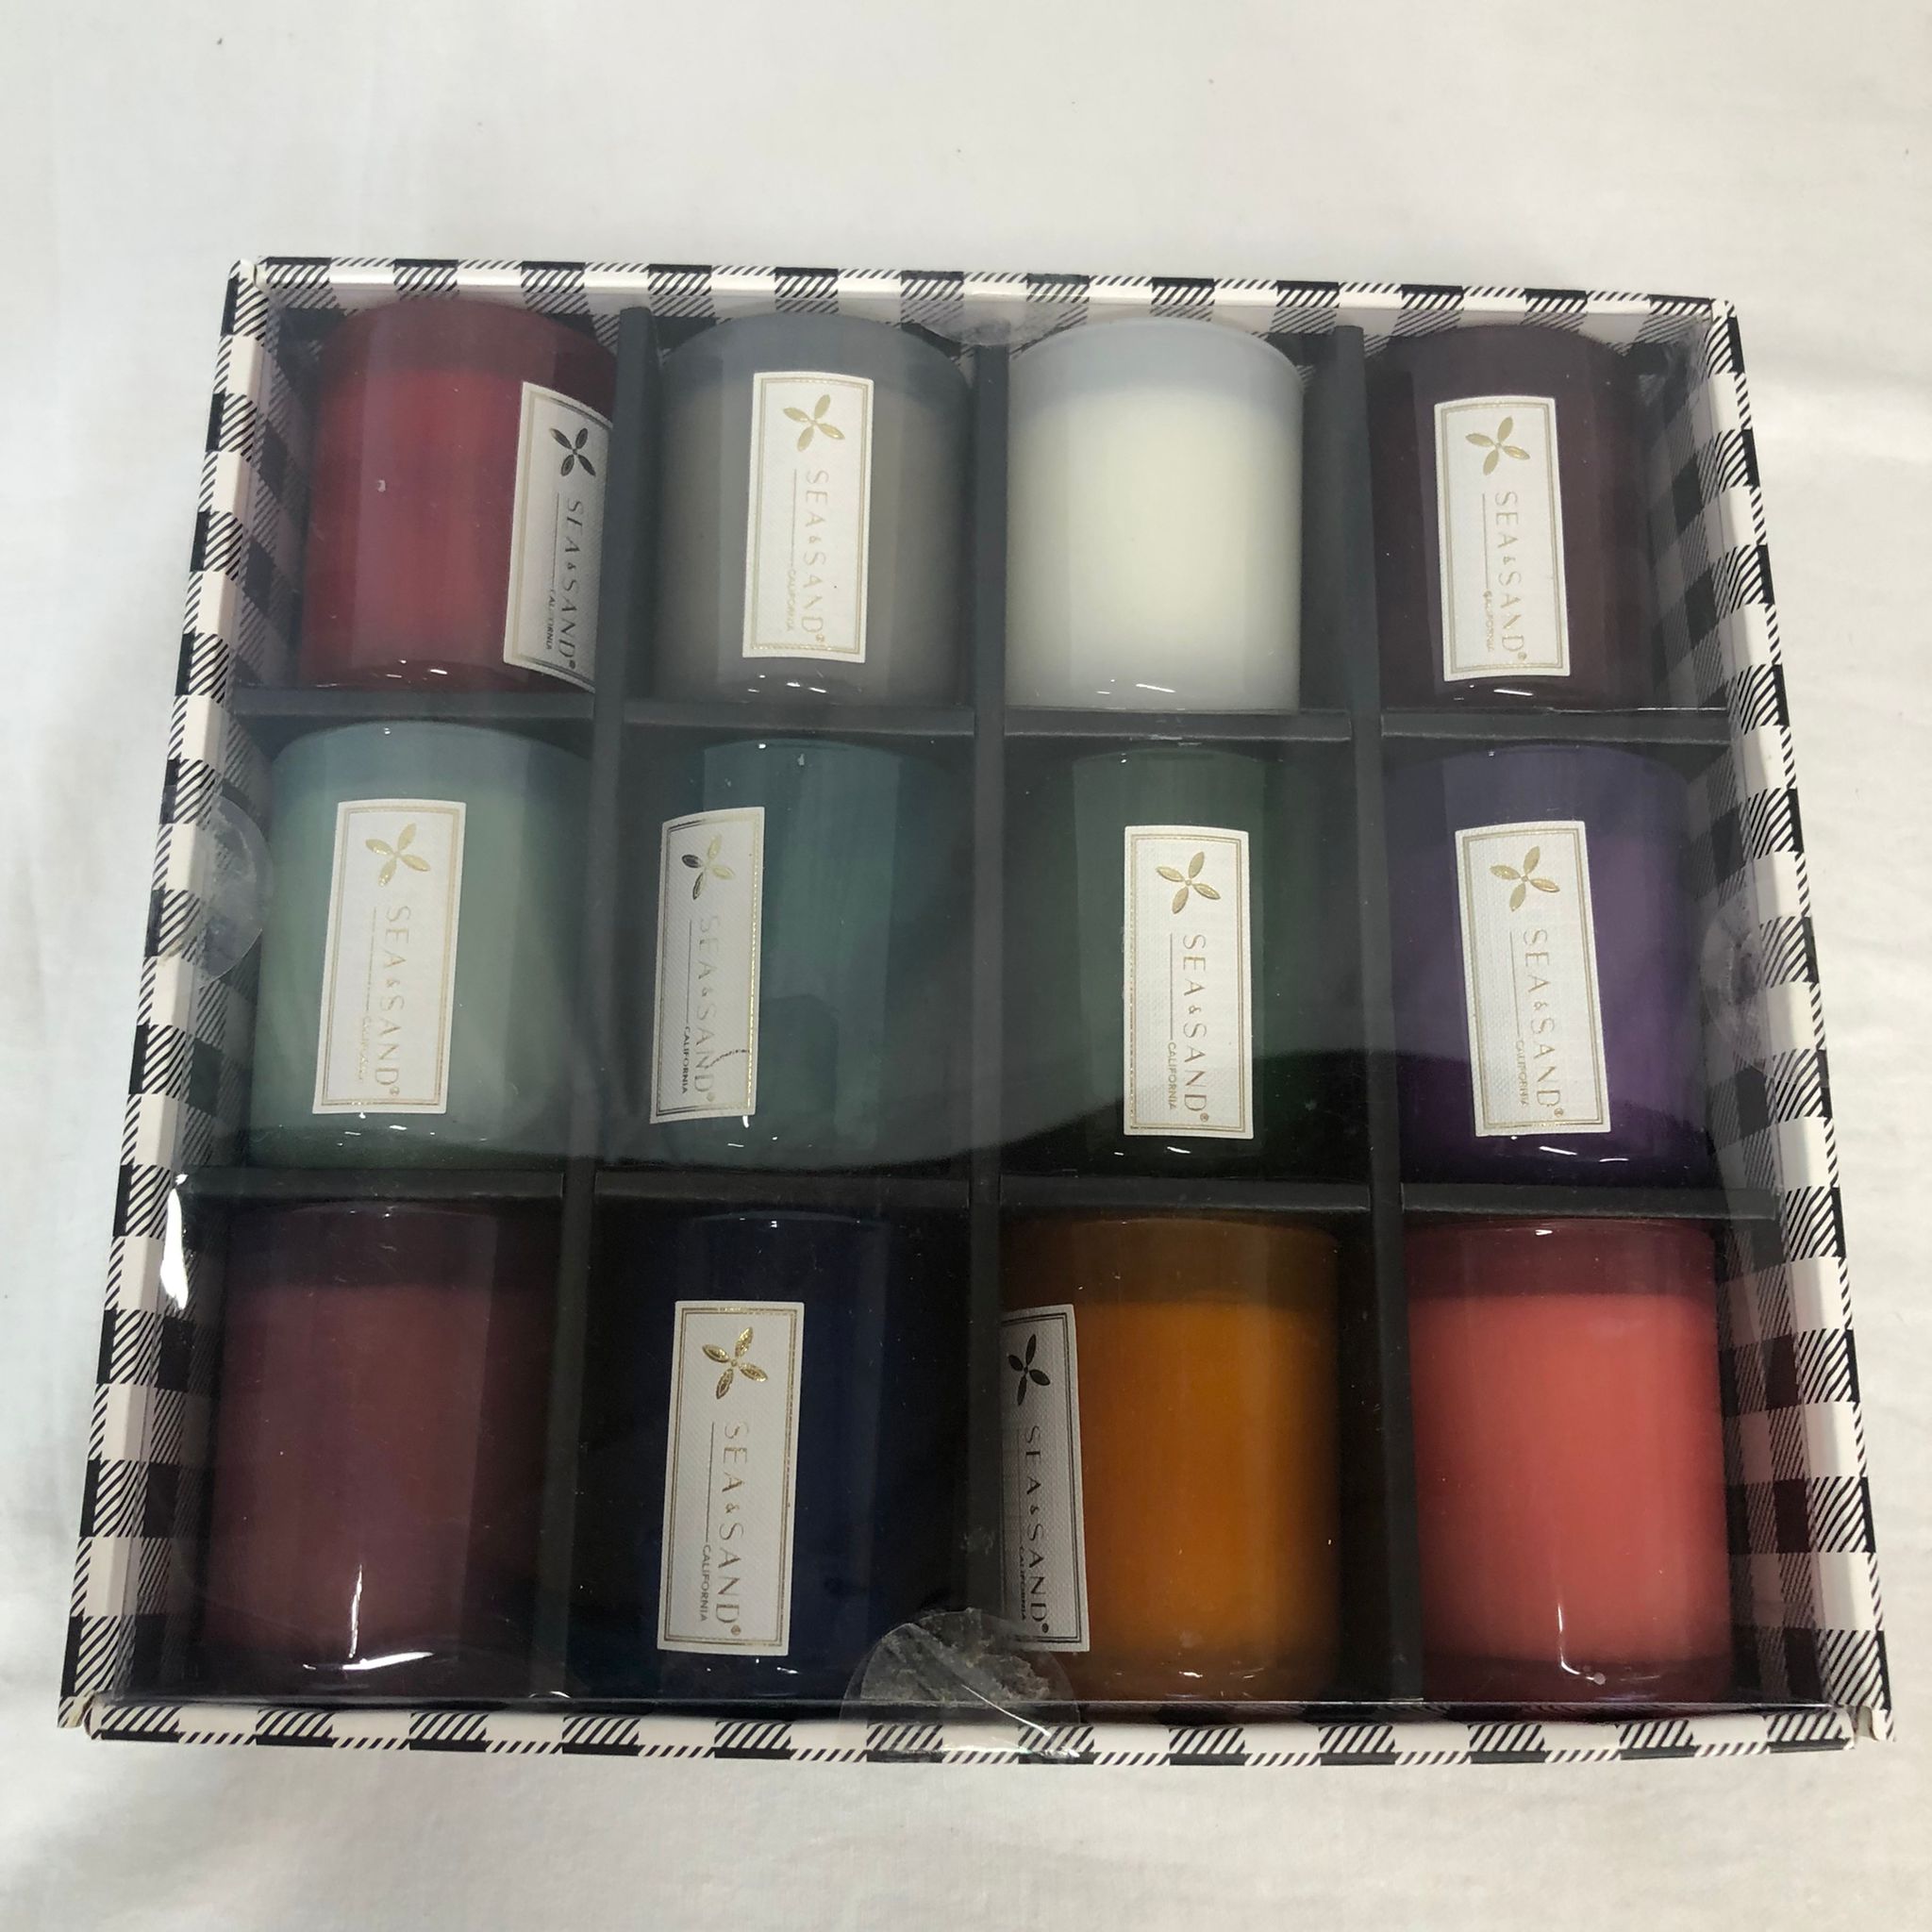 Sea & Sand 4 oz Scented Votive Candles, Set of 12